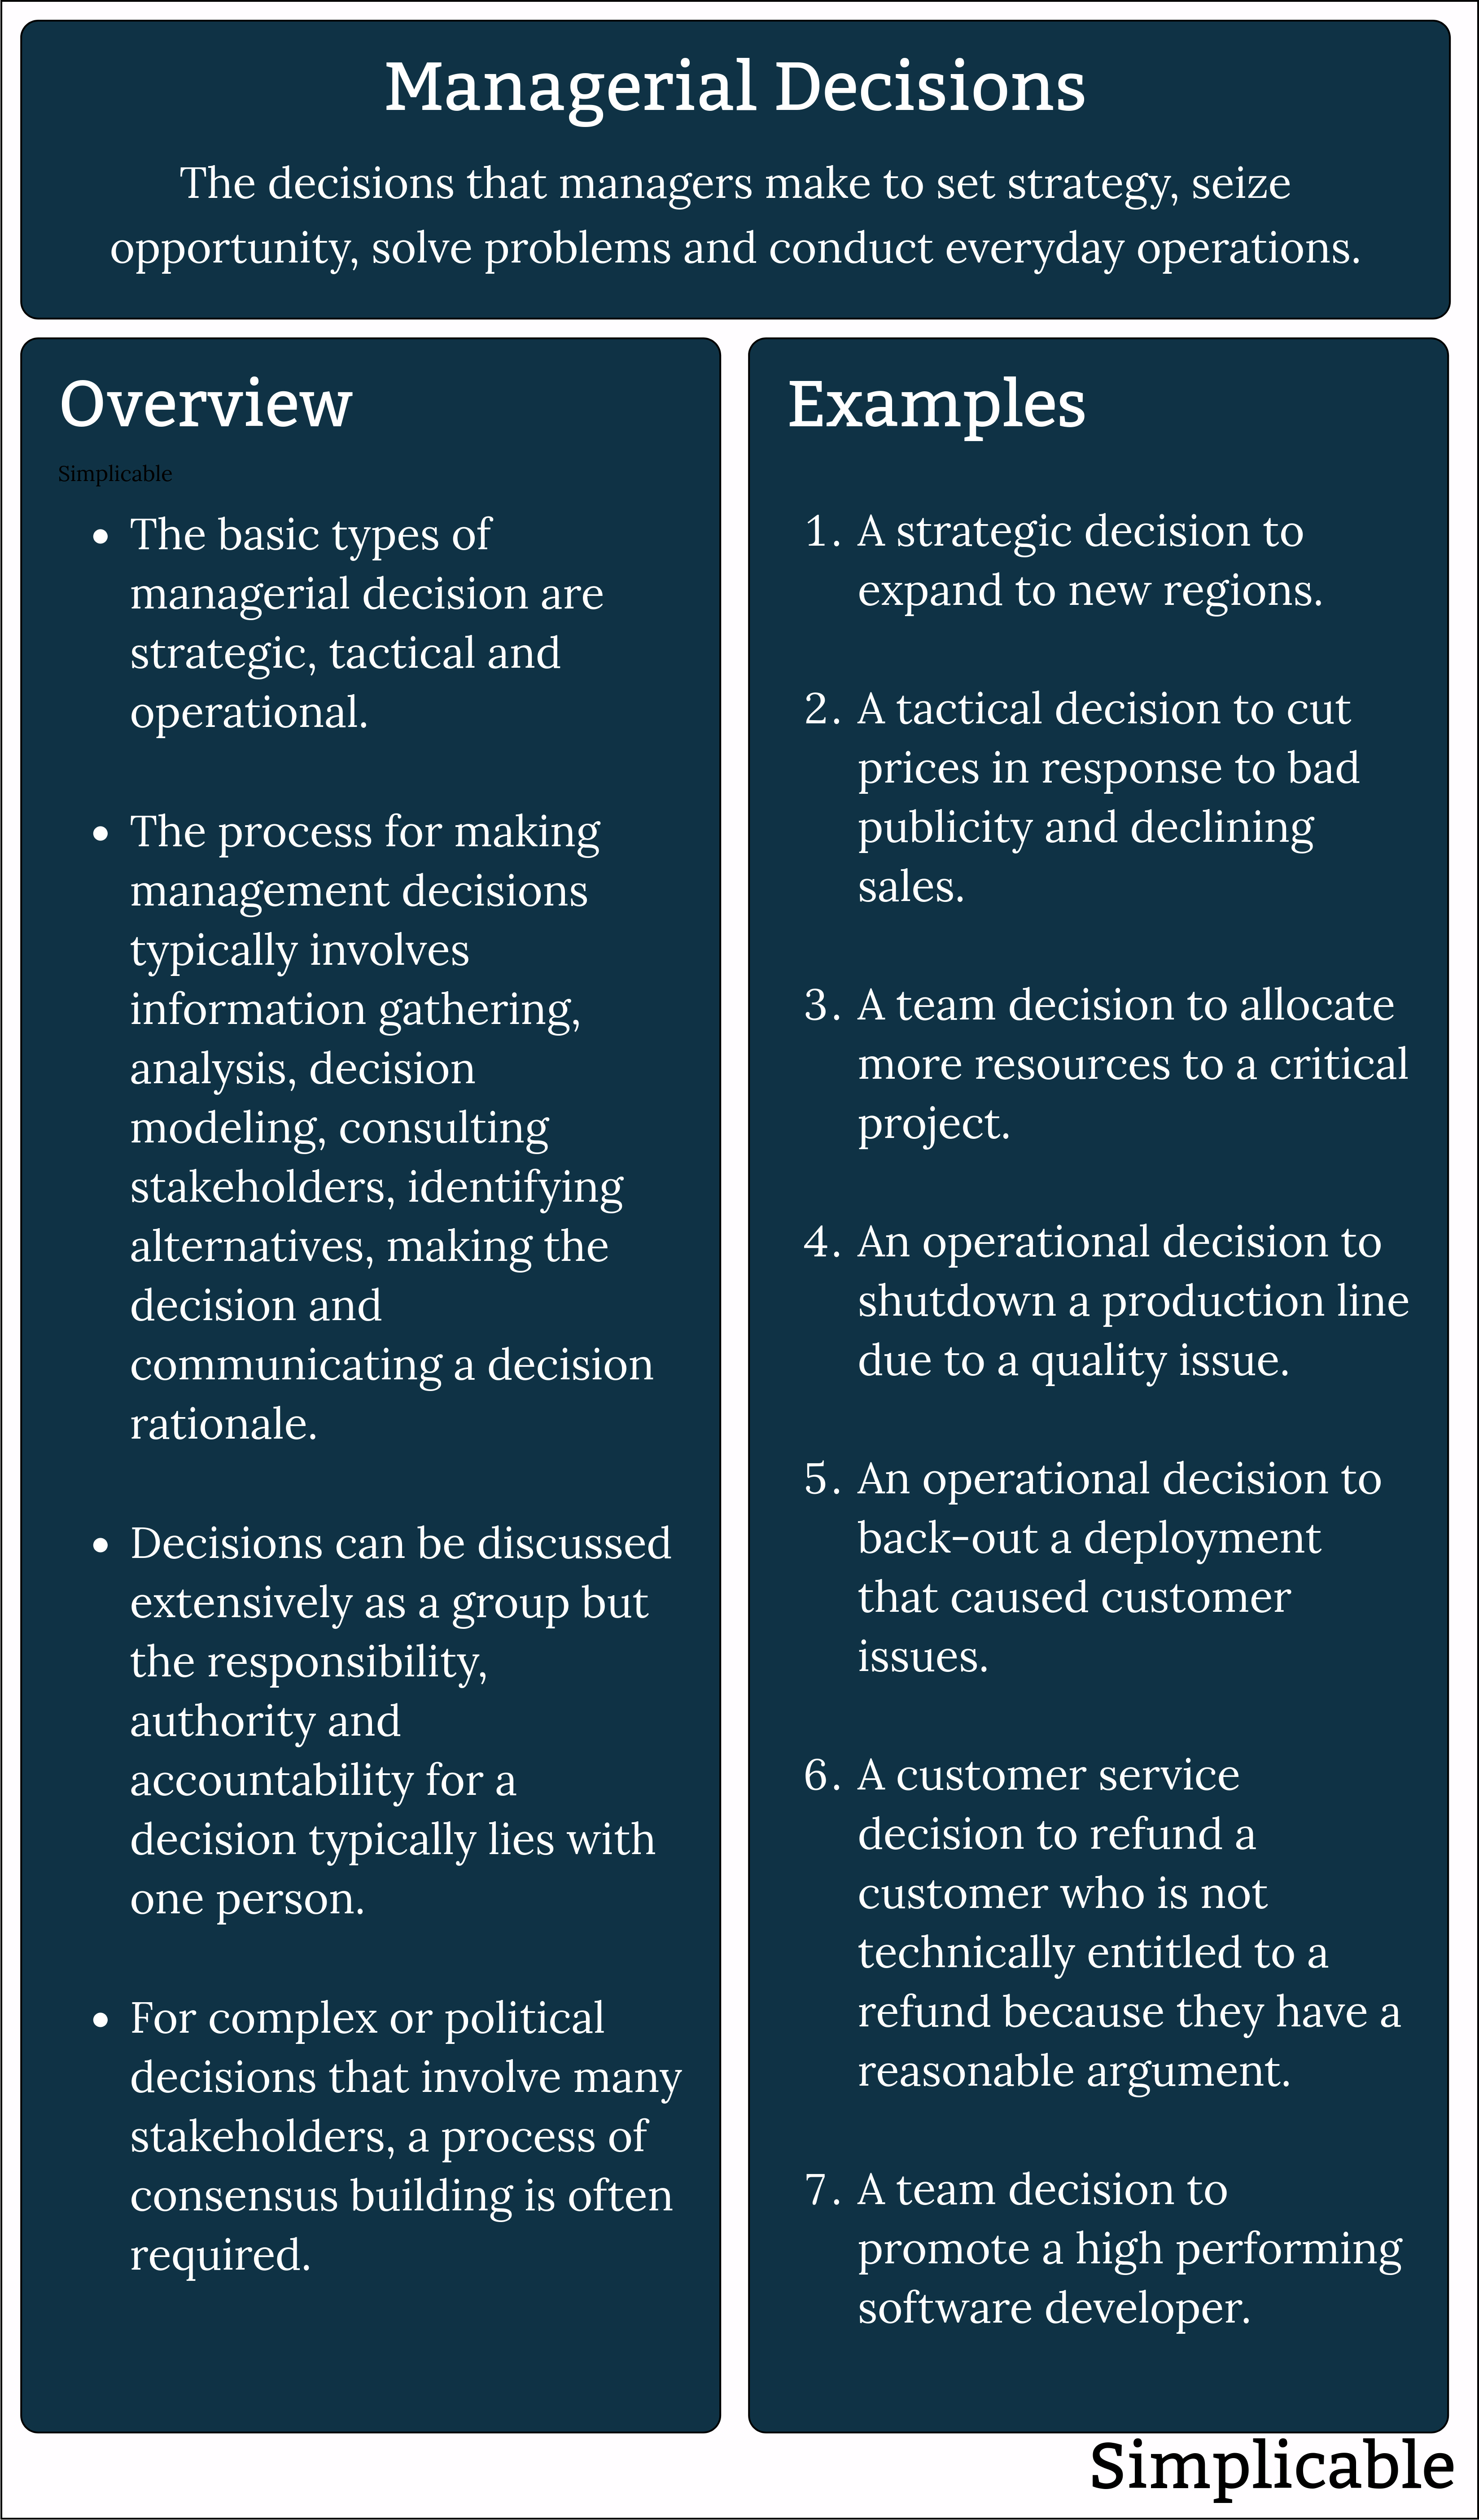 managerial decisions overview and examples